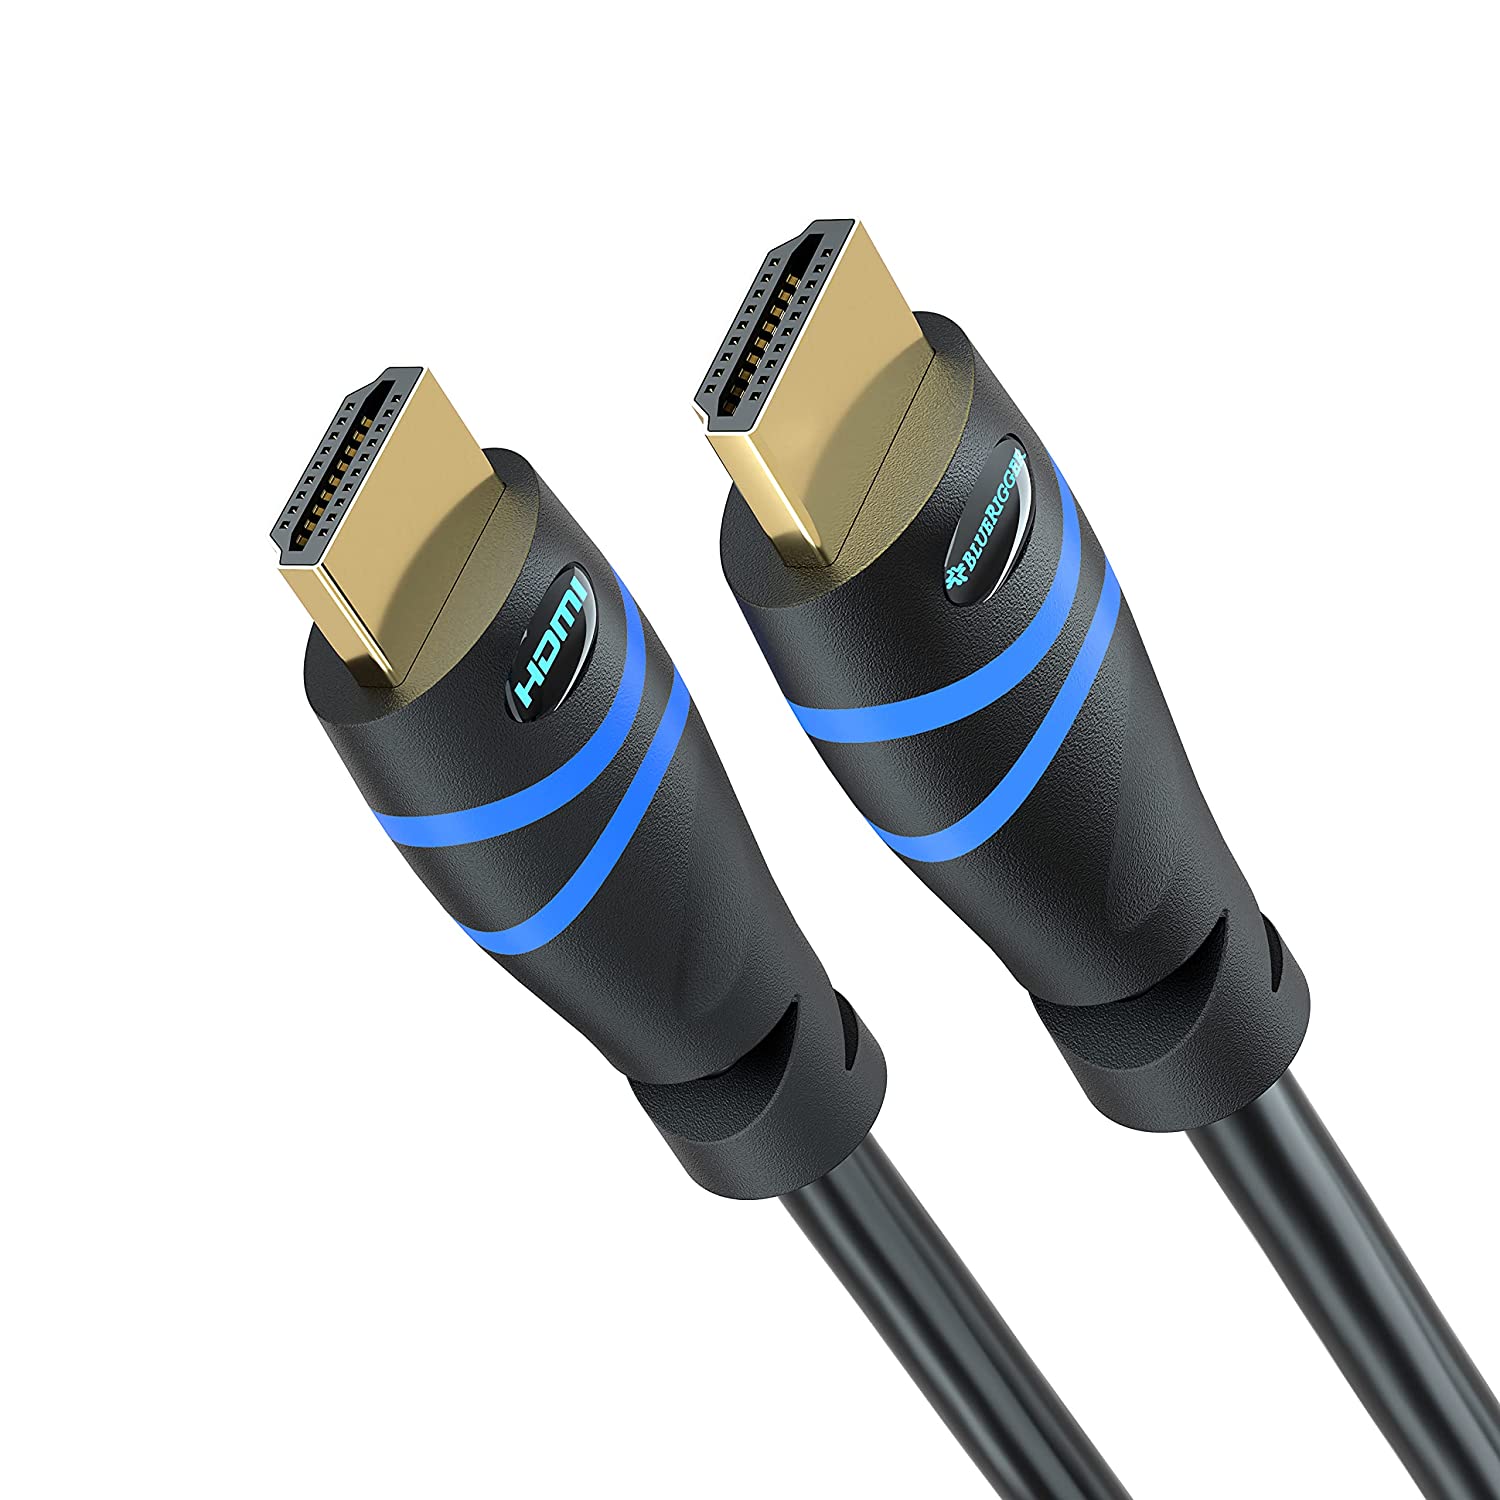  2. BlueRigger 4K HDMI Cable 25 Feet 